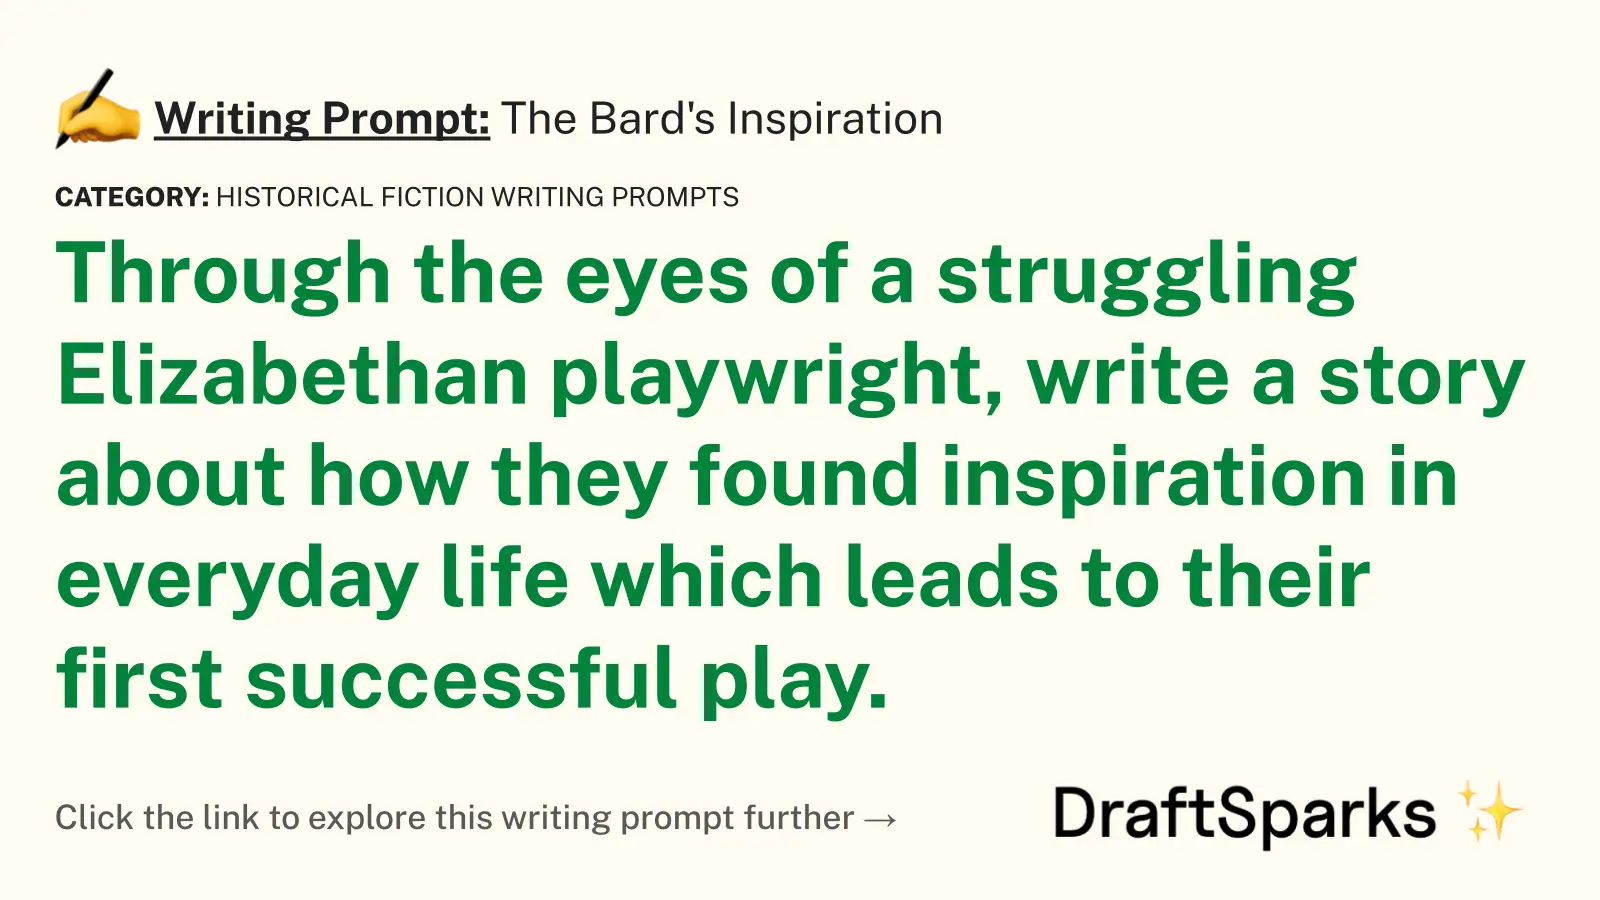 The Bard’s Inspiration